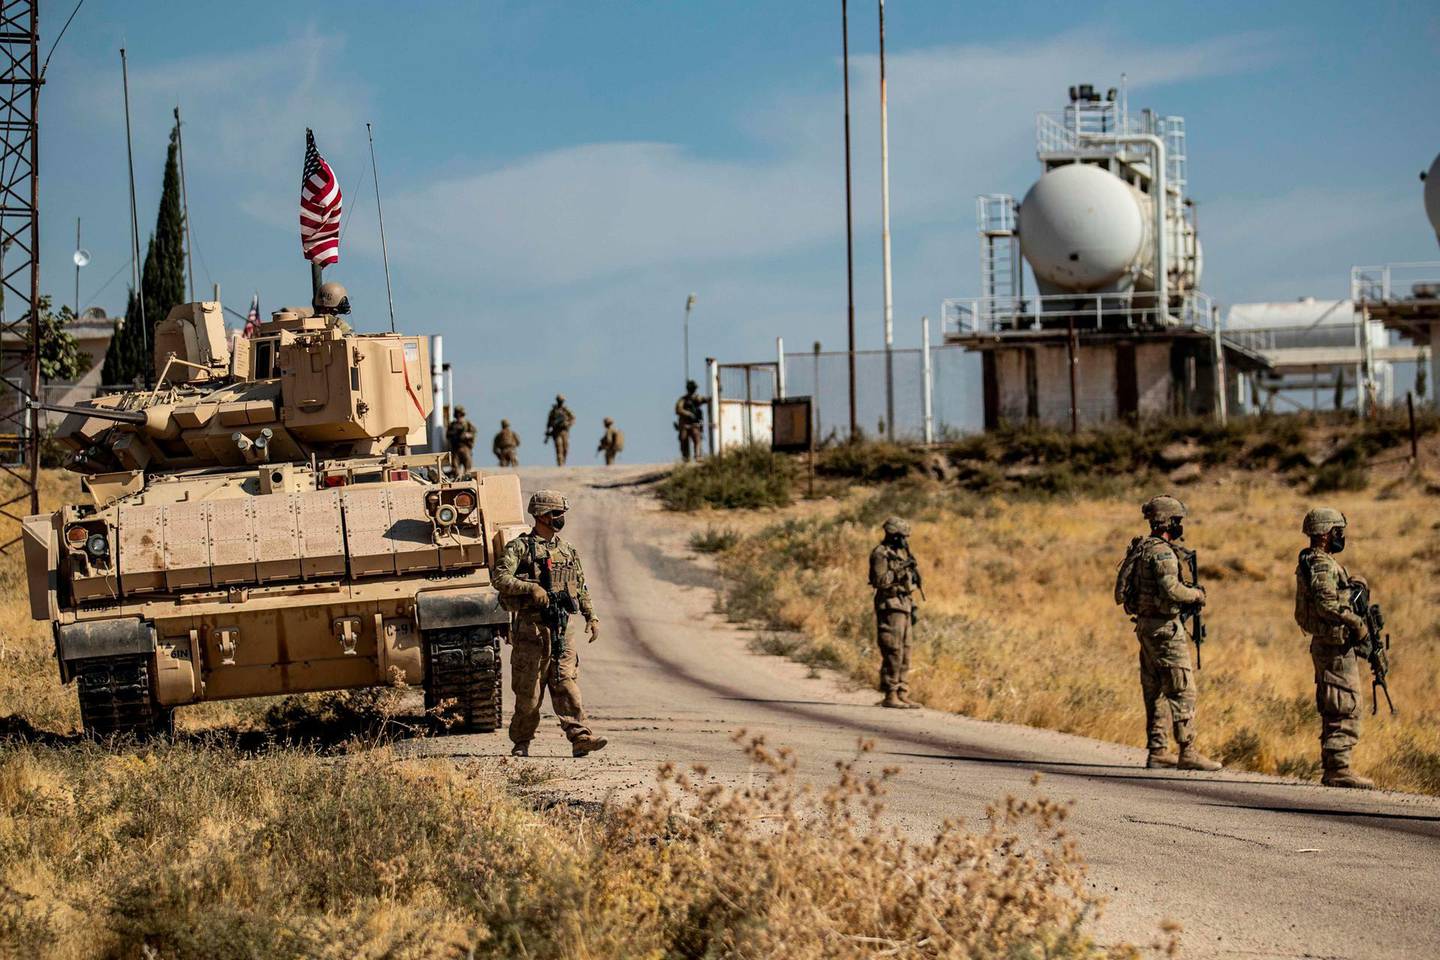 US soldiers walk near a Bradley Fighting Vehicle (BFV) during a military patrol by oil production facilities in the countryside near al-Malikiyah (Derik) in Syria's northeastern Hasakah province on October 27, 2020.  / AFP / Delil SOULEIMAN
